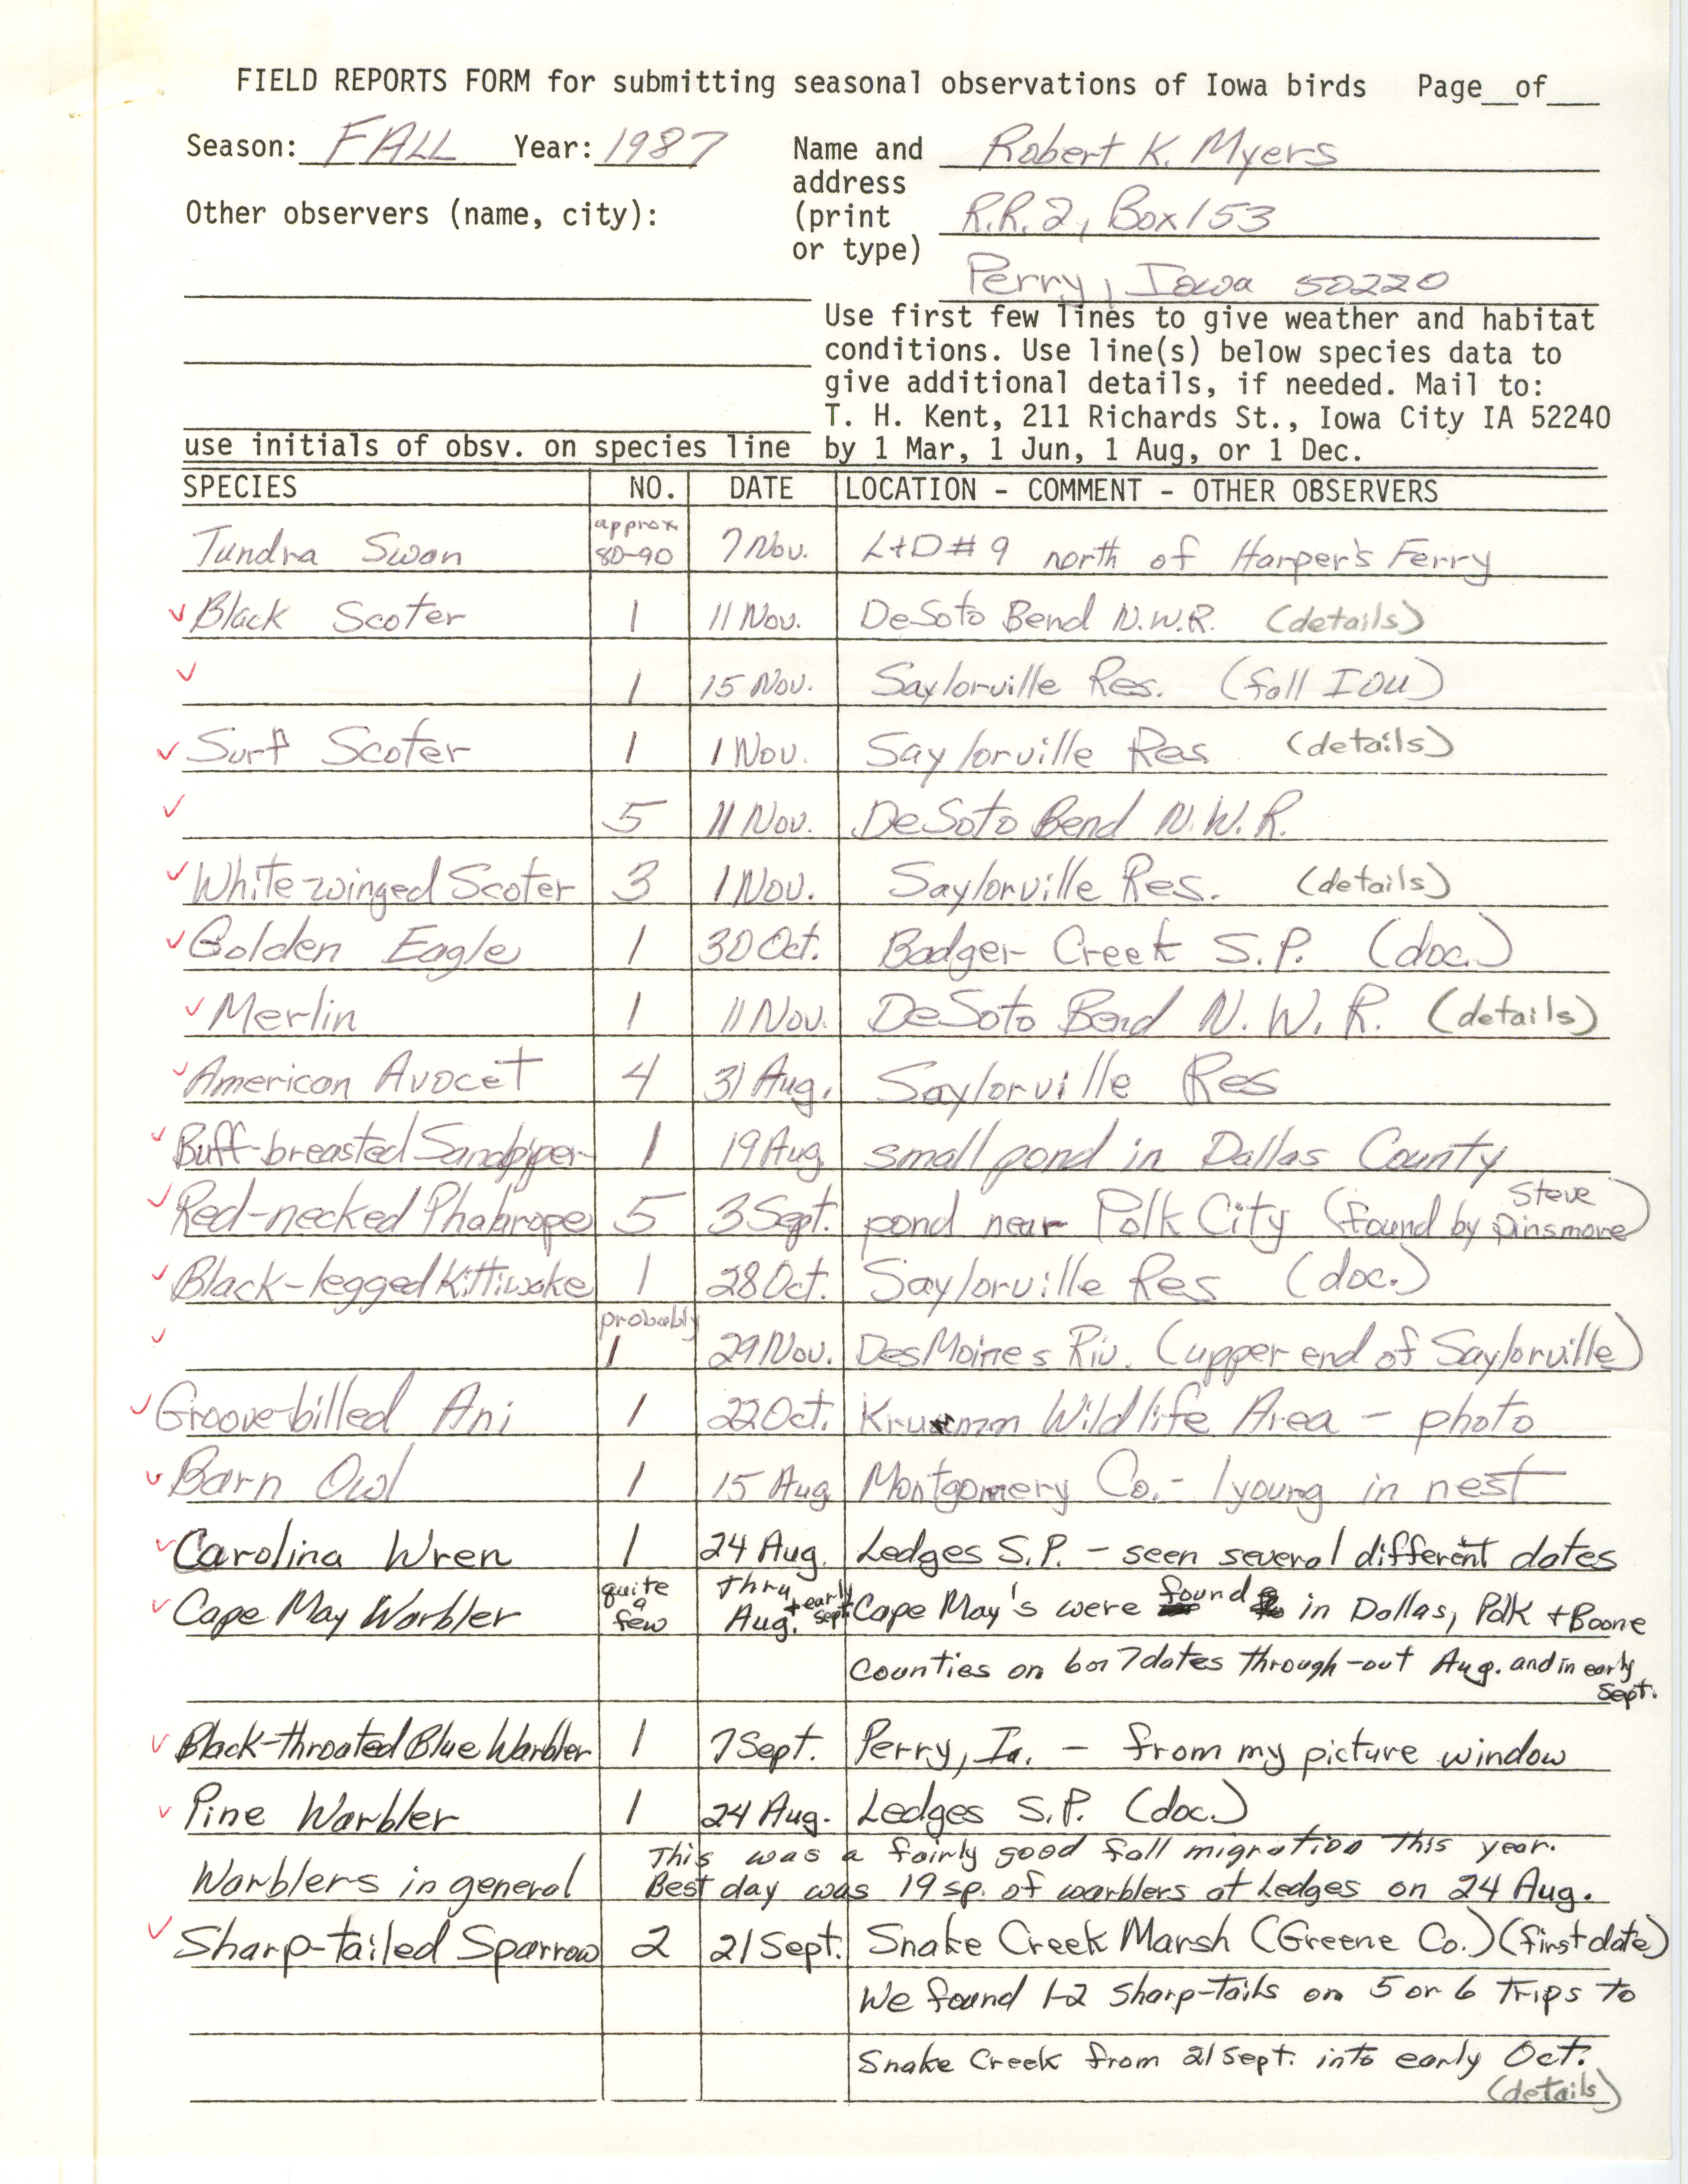 Field reports form for submitting seasonal observations of Iowa birds, Robert K. Myers, fall 1987